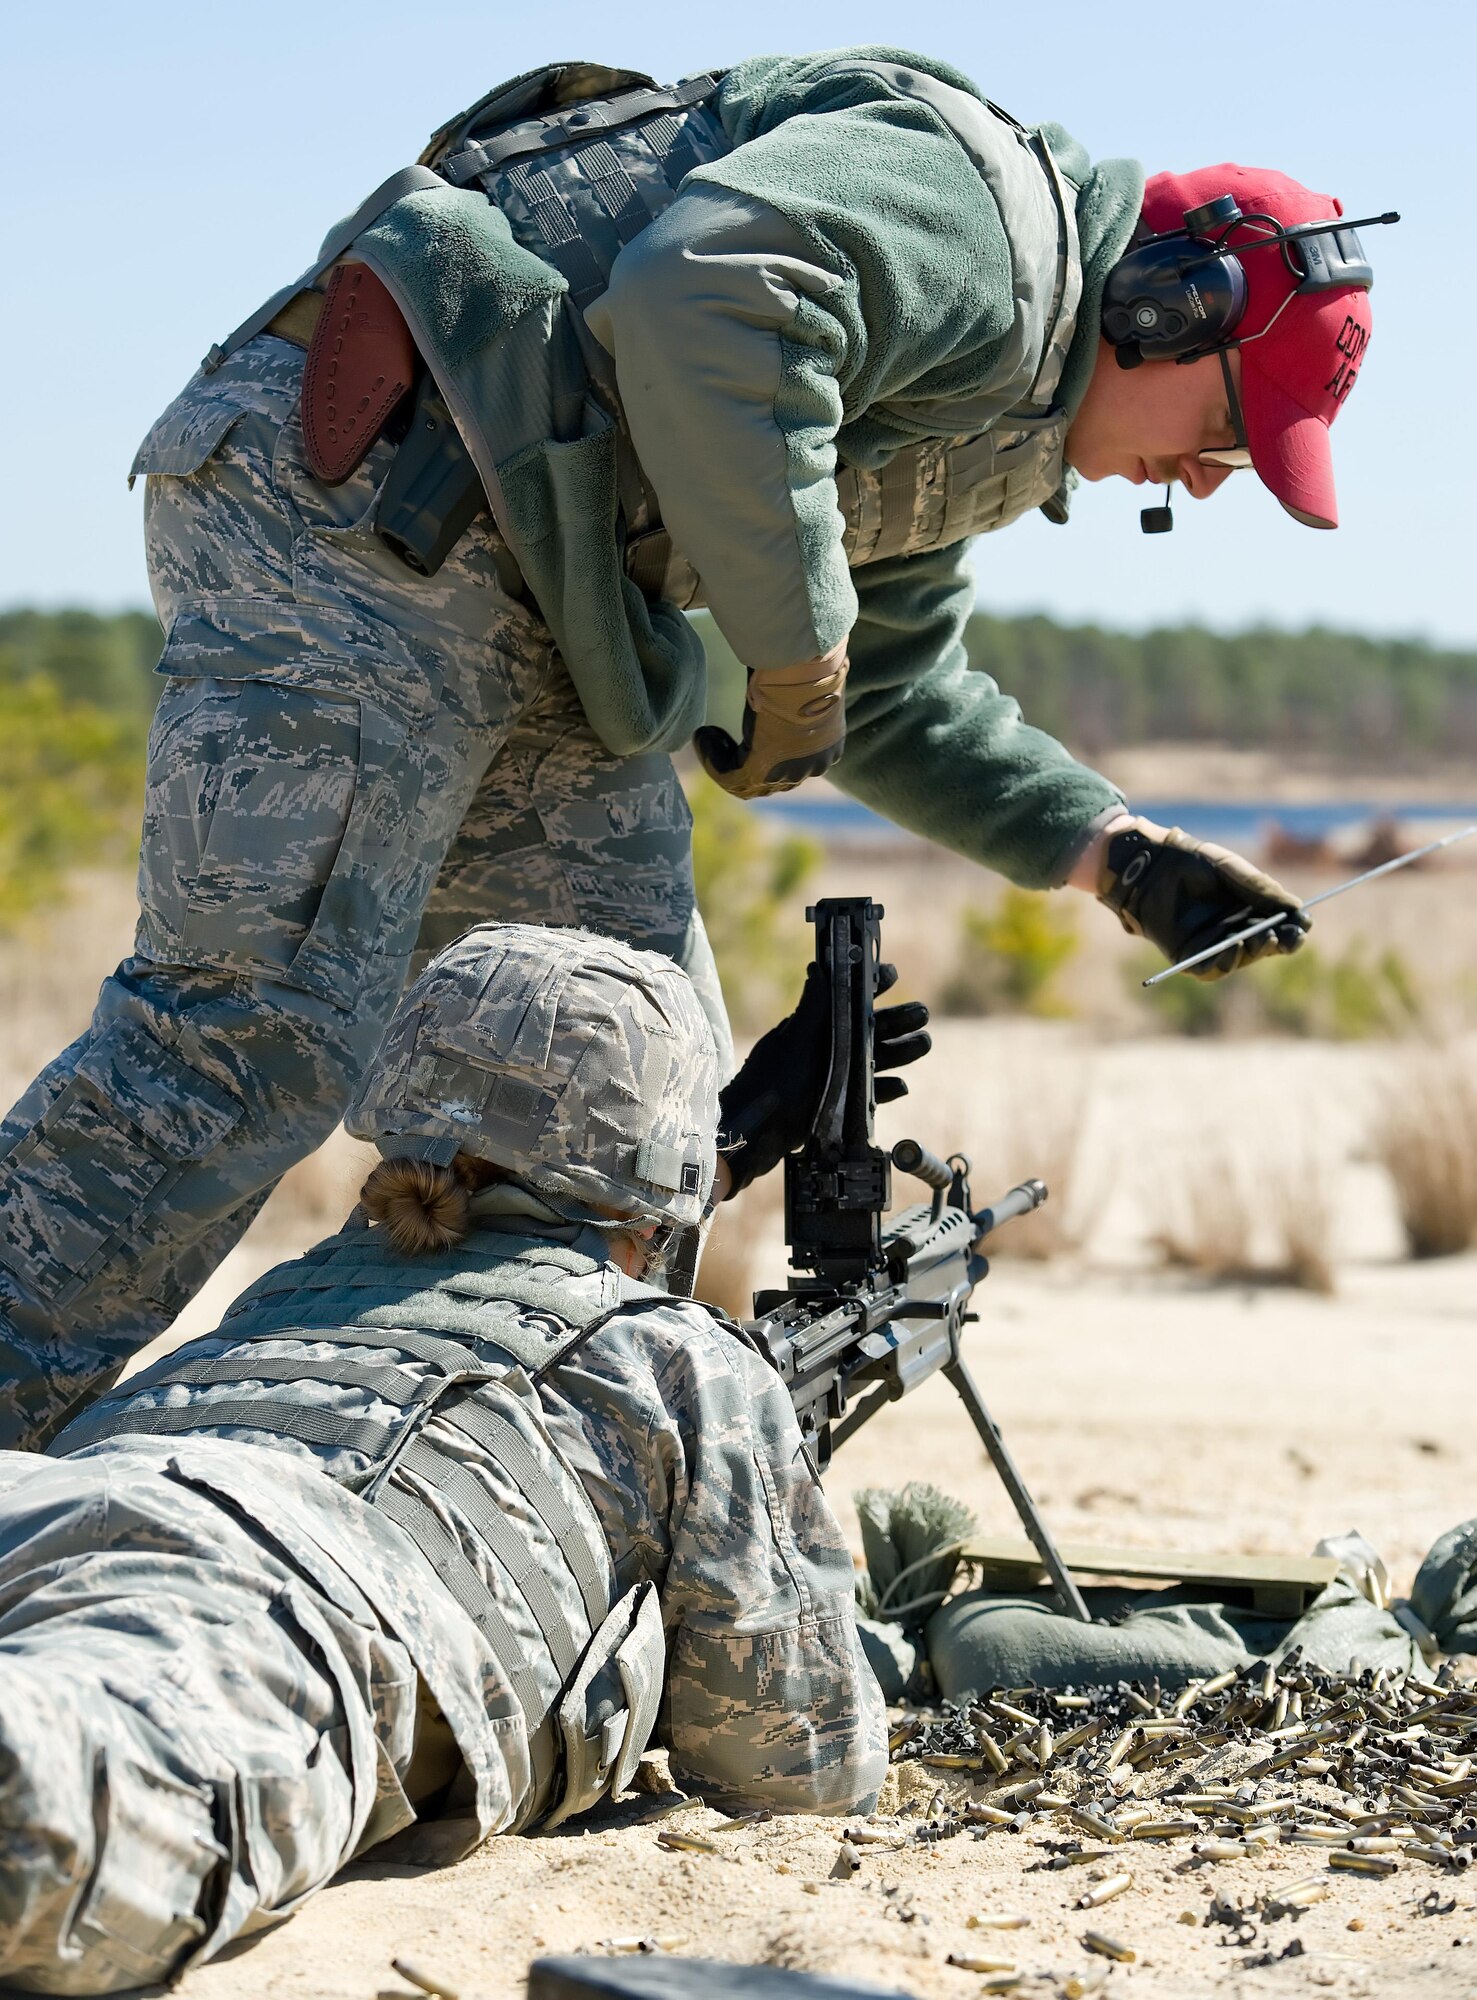 Senior Airman Jeffrey Burton, 436th Security Forces Squadron Combat Arms instructor, prepares to “rod” the barrel of the M-249 Light Machine Gun being fired by Airman 1st Class Annamae Prentiss, 436th SFS response force member, March 9, 2017, at Range 7 on Joint Base McGuire-Dix-Lakehurst, N.J. Burton rodded the barrel to ensure it was free from any obstruction prior to a barrel change on the M-249. (U.S. Air Force photo by Roland Balik)